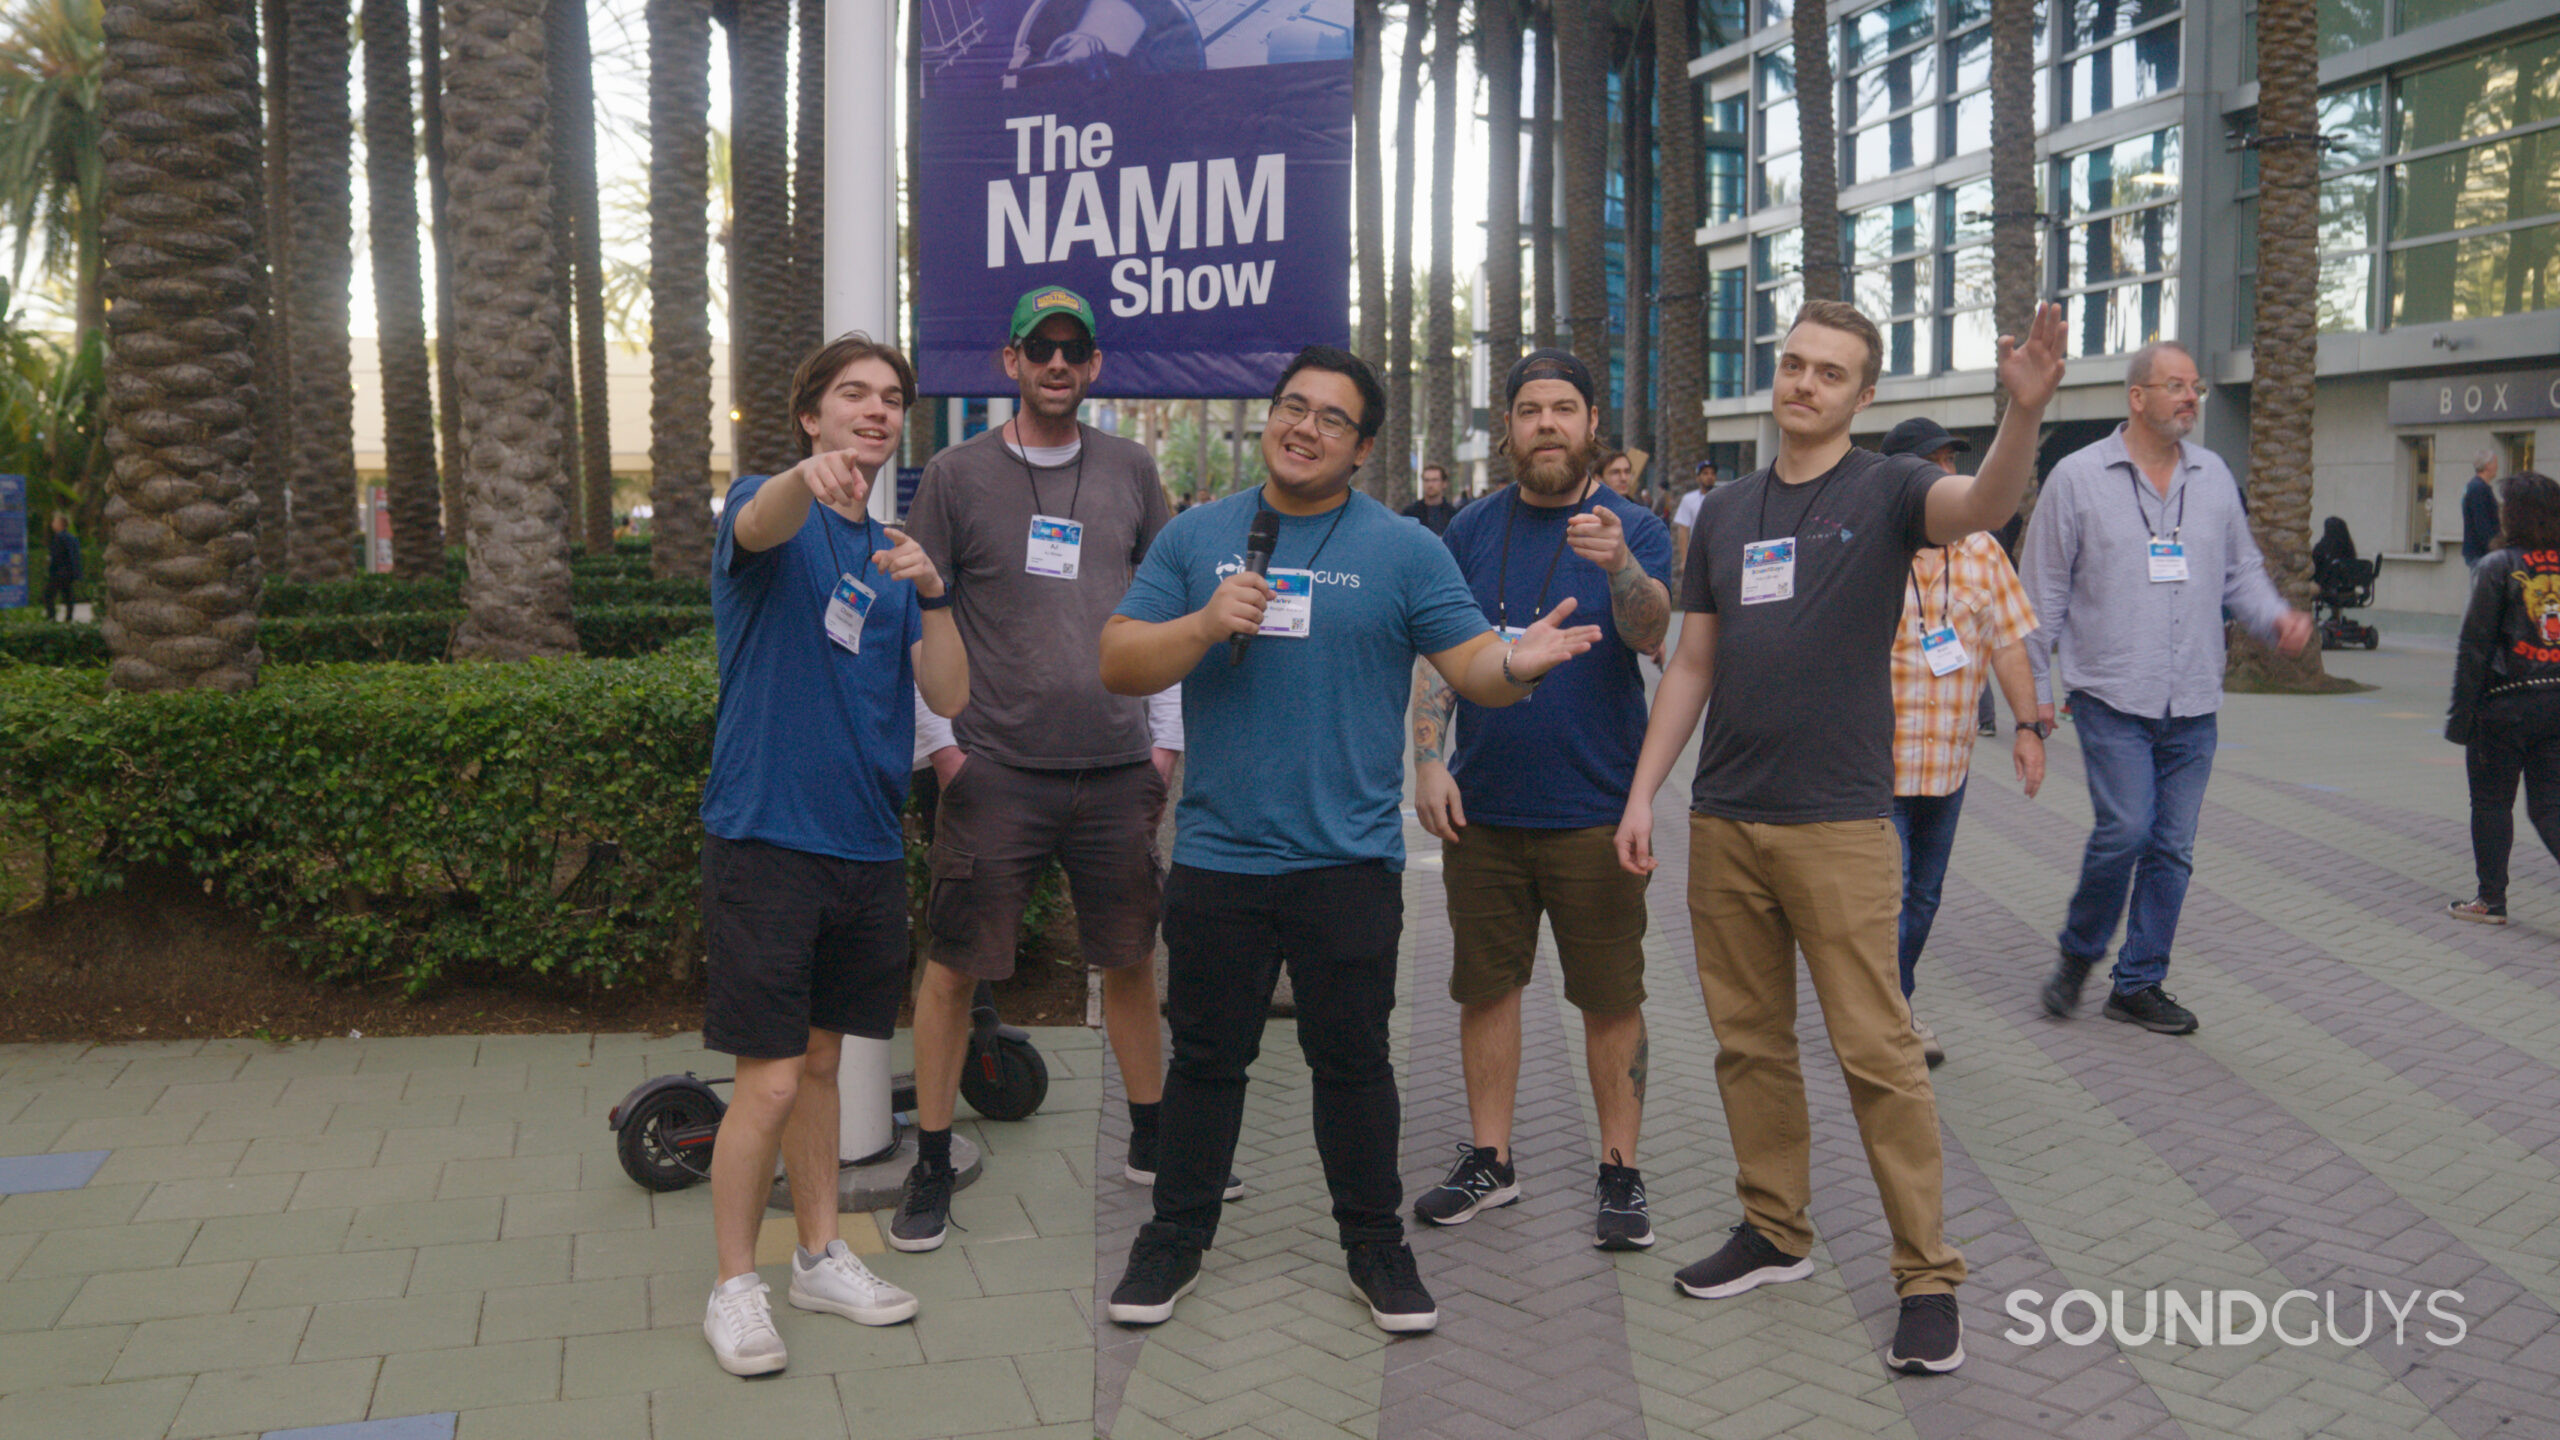 The SoundGuys team standing outside together at NAMM.